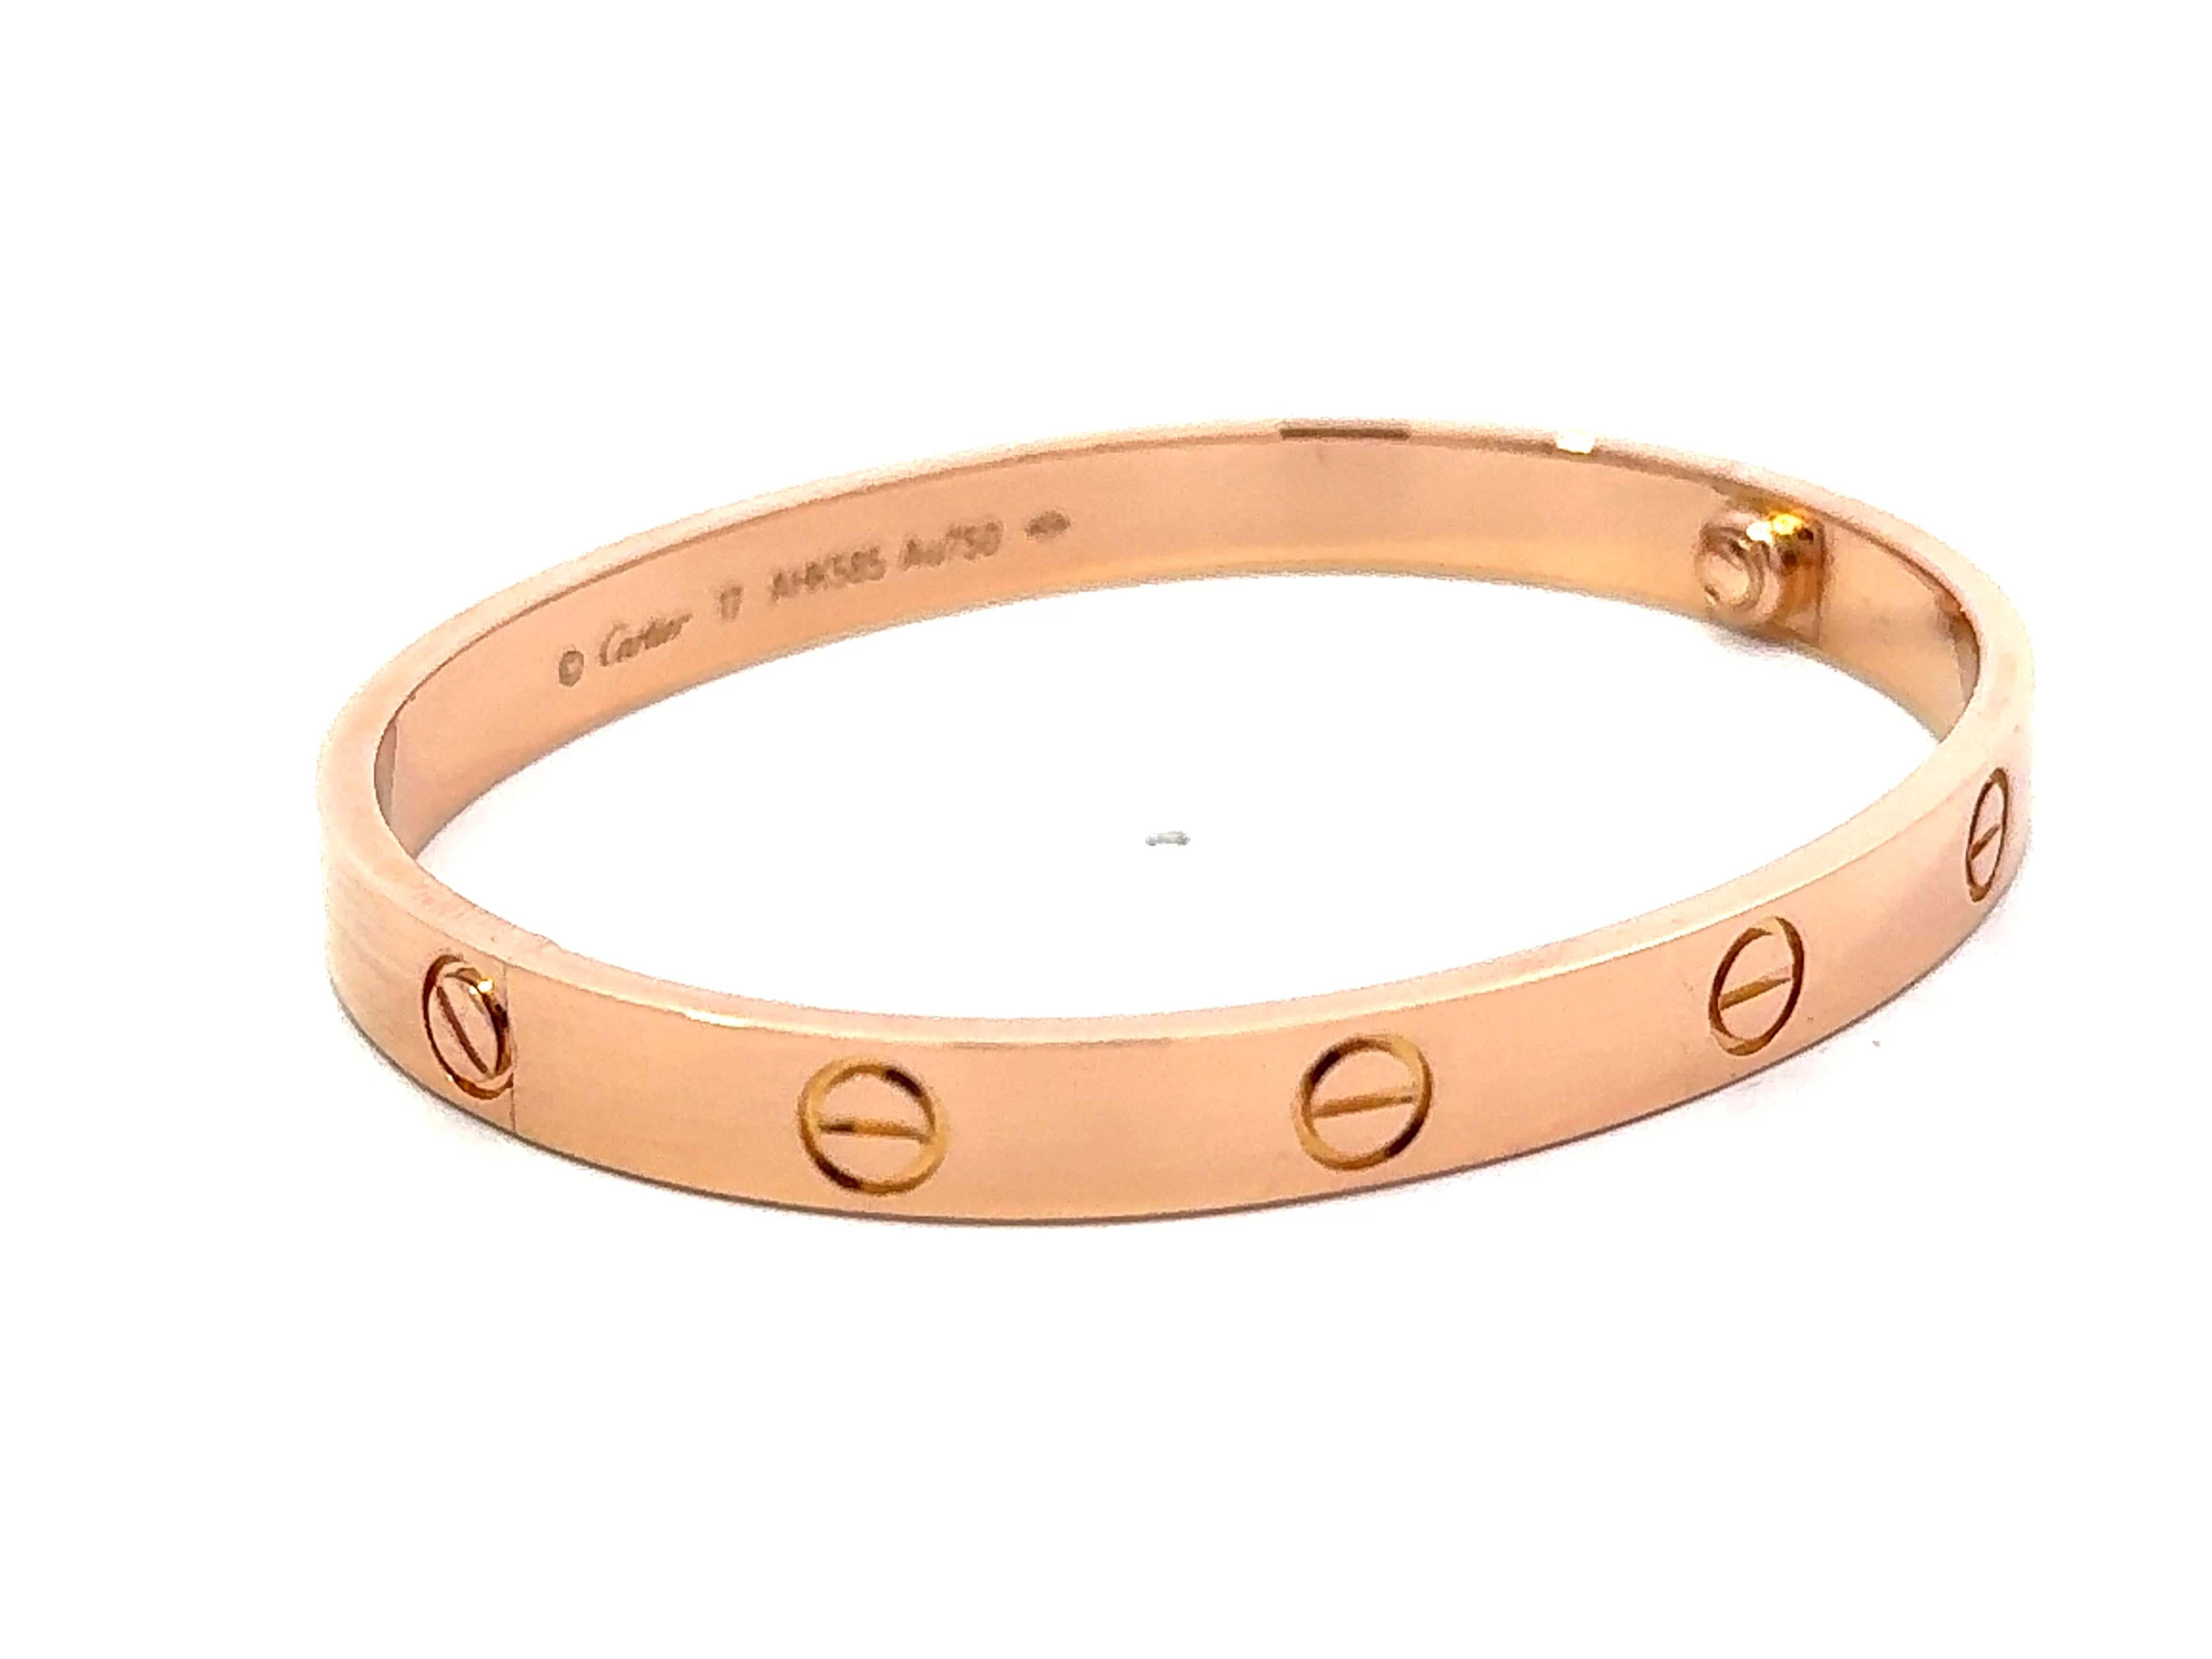 Cartier Love Bracelet in 18K Rose Gold Size 17 With Box and Papers For Sale 5